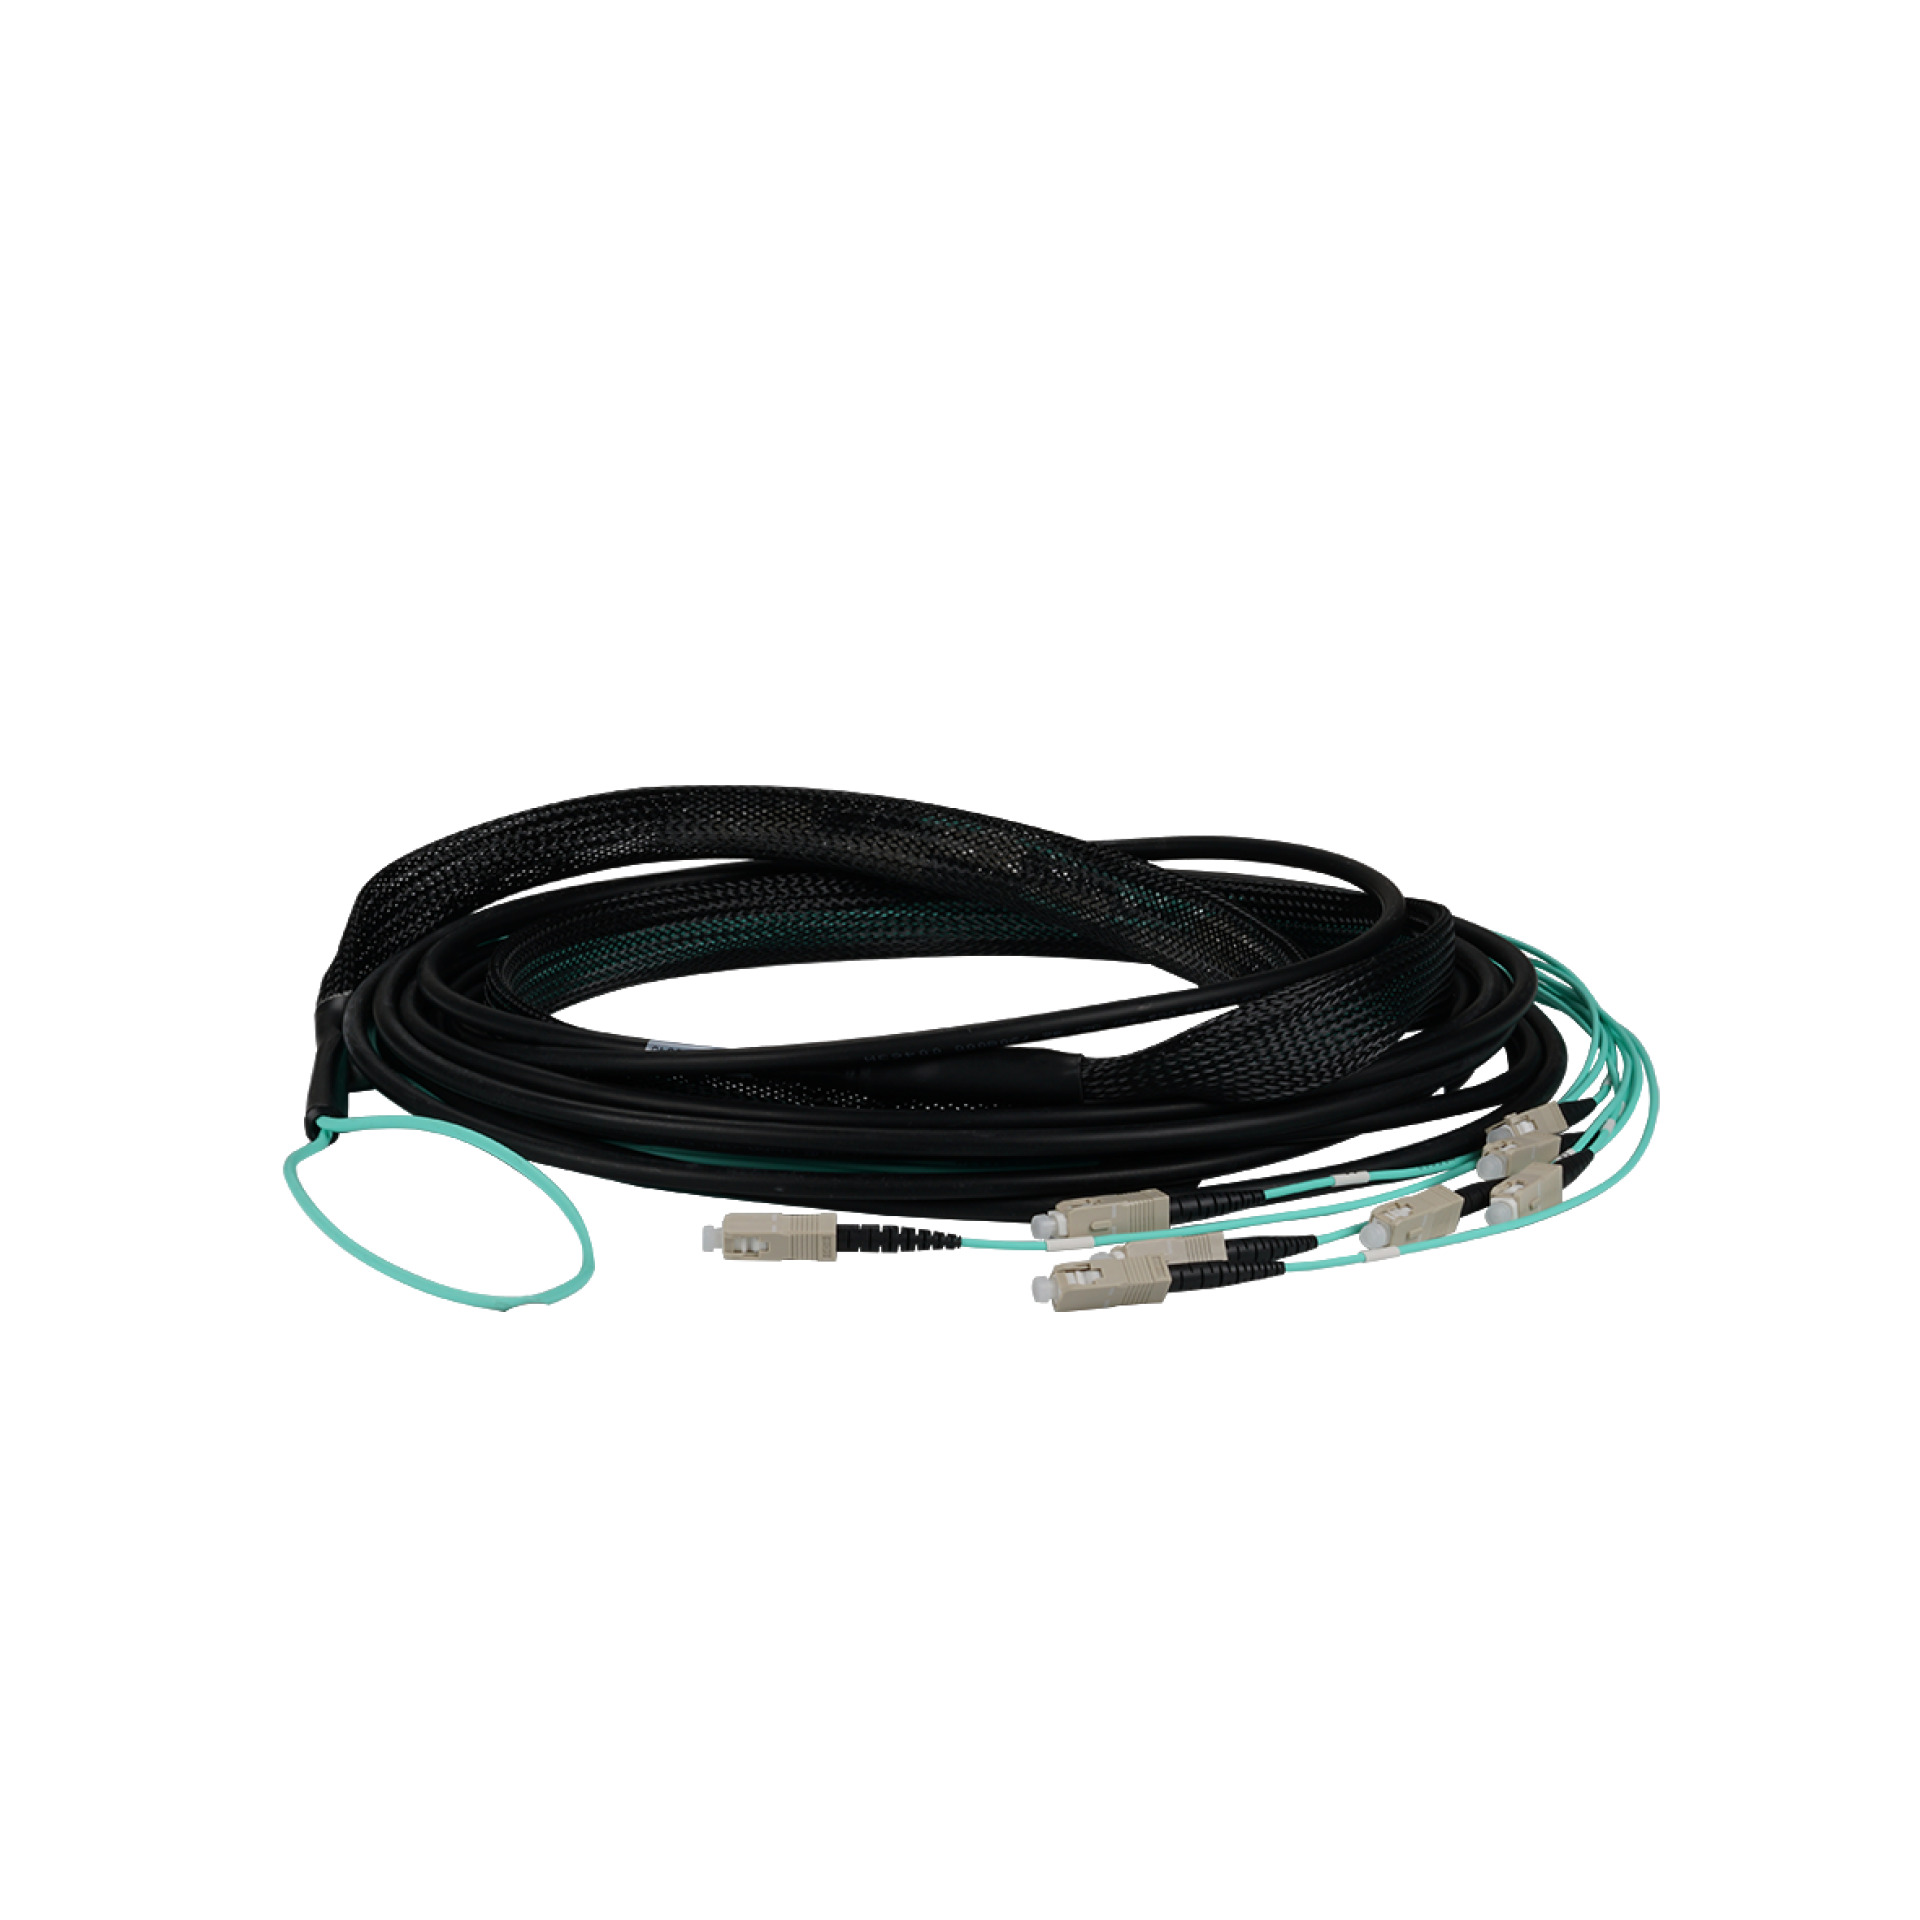 Trunk cable U-DQ(ZN)BH 4G 50/125, SC/SC OM3 130m